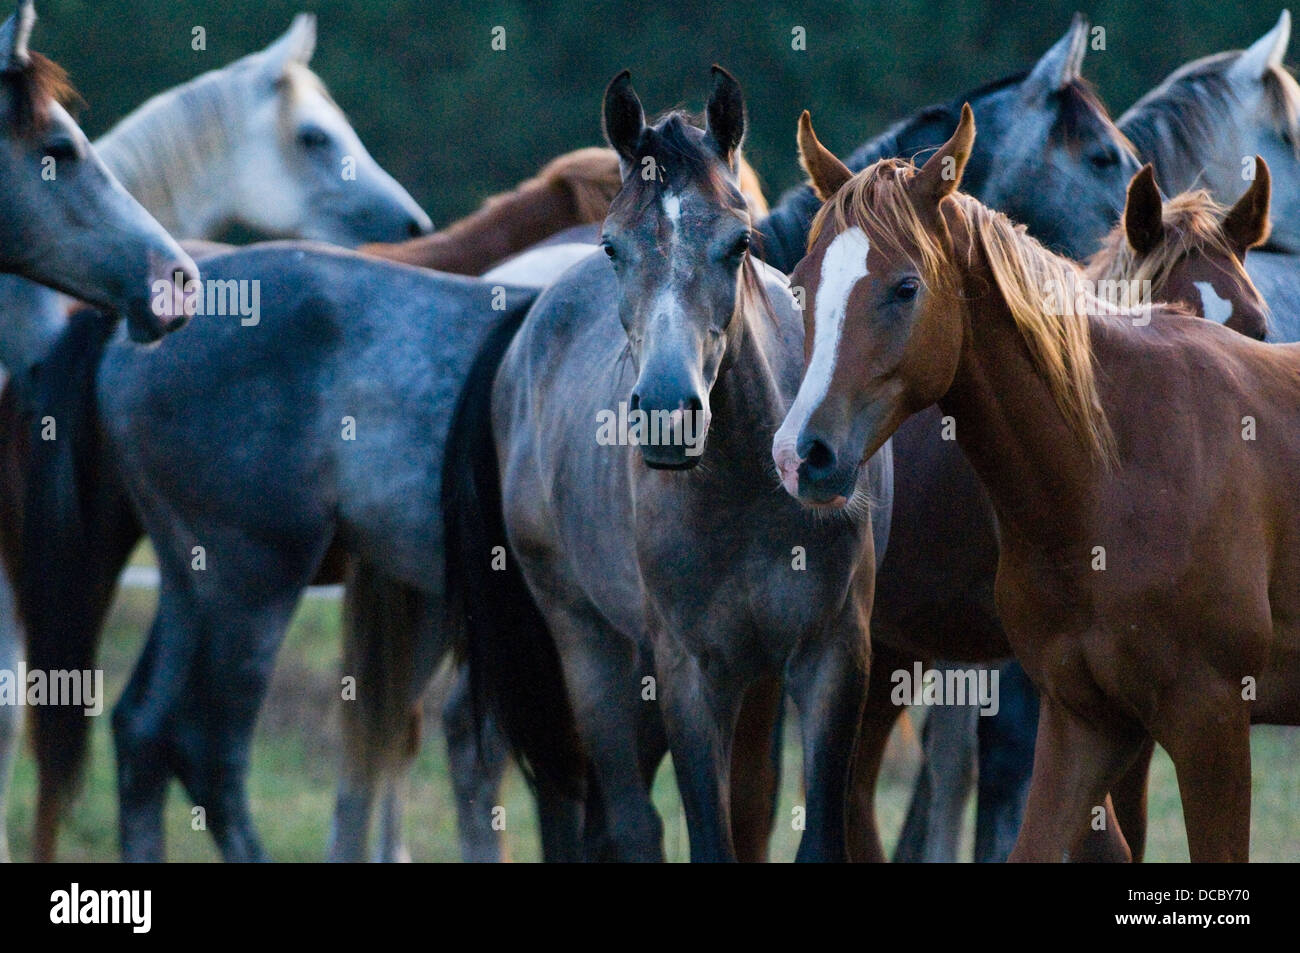 colt, horse, farm, mammal, animal, nature, mare, foal, stallion, brown, speed, pasture, beautiful, race, equestrian, fast, equine, gallop, run, young, Stock Photo